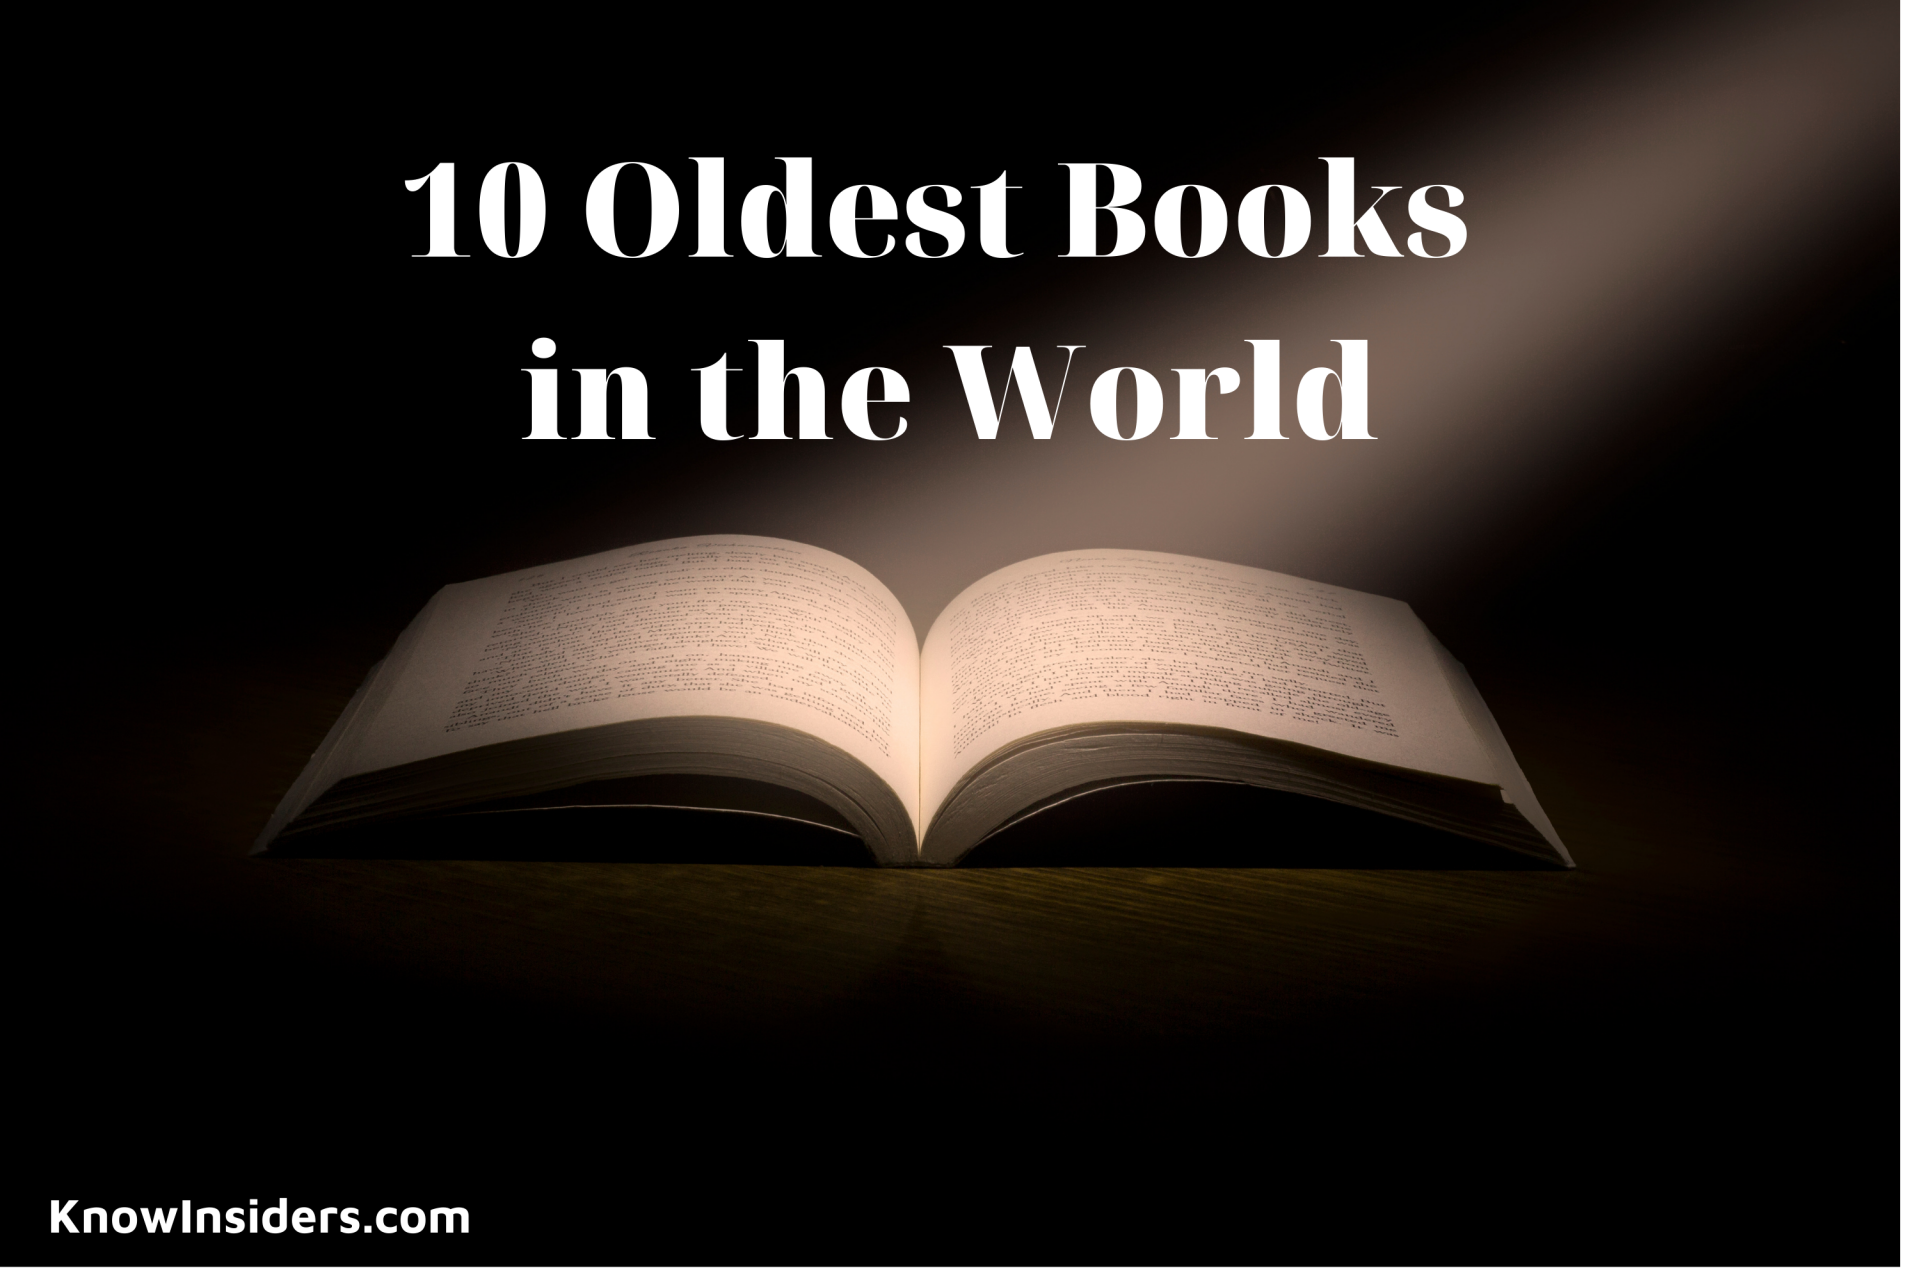 what are the oldest books top 10 in the world